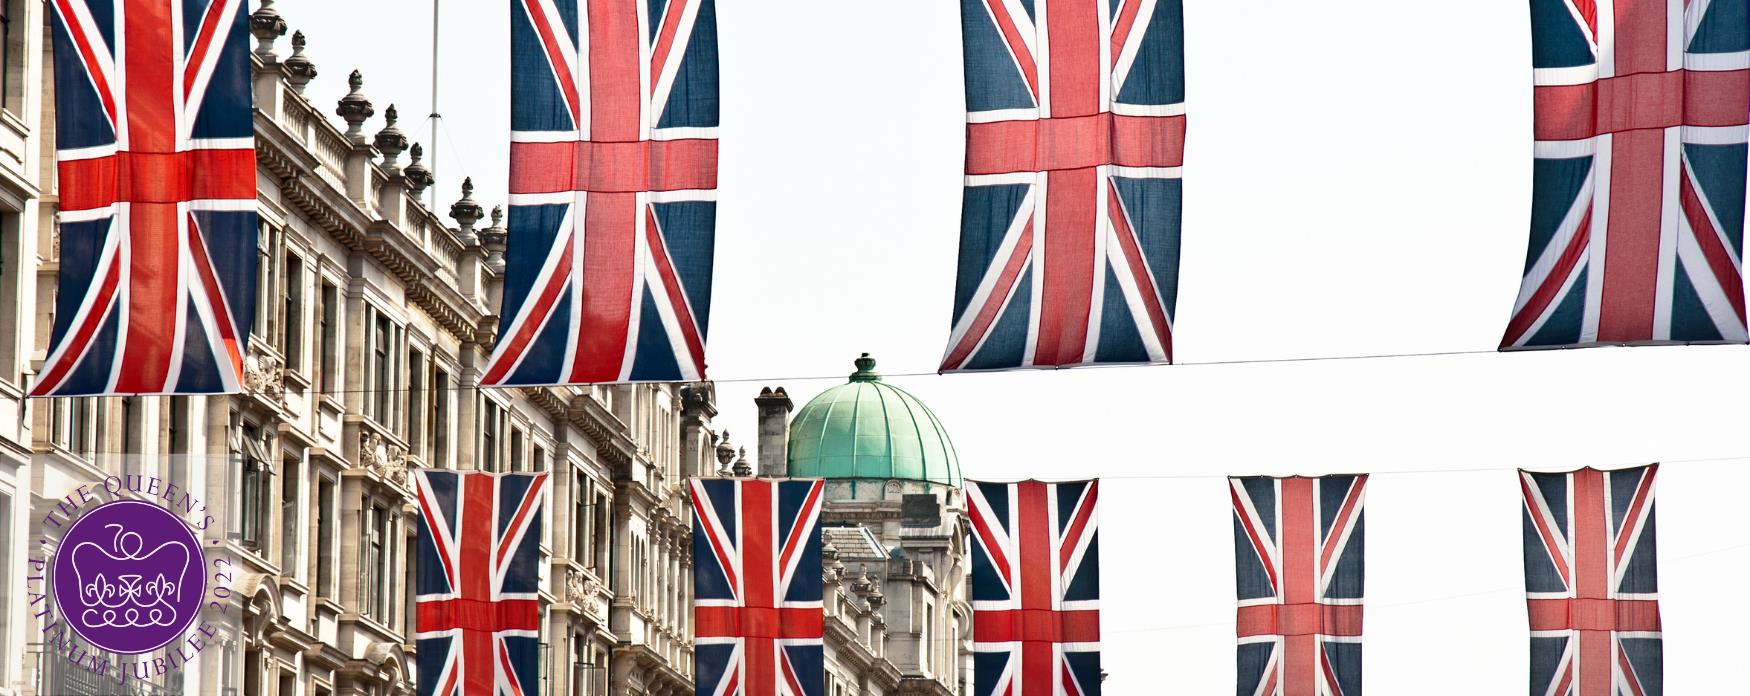 Platinum Jubilee Header of British Flags in Central London